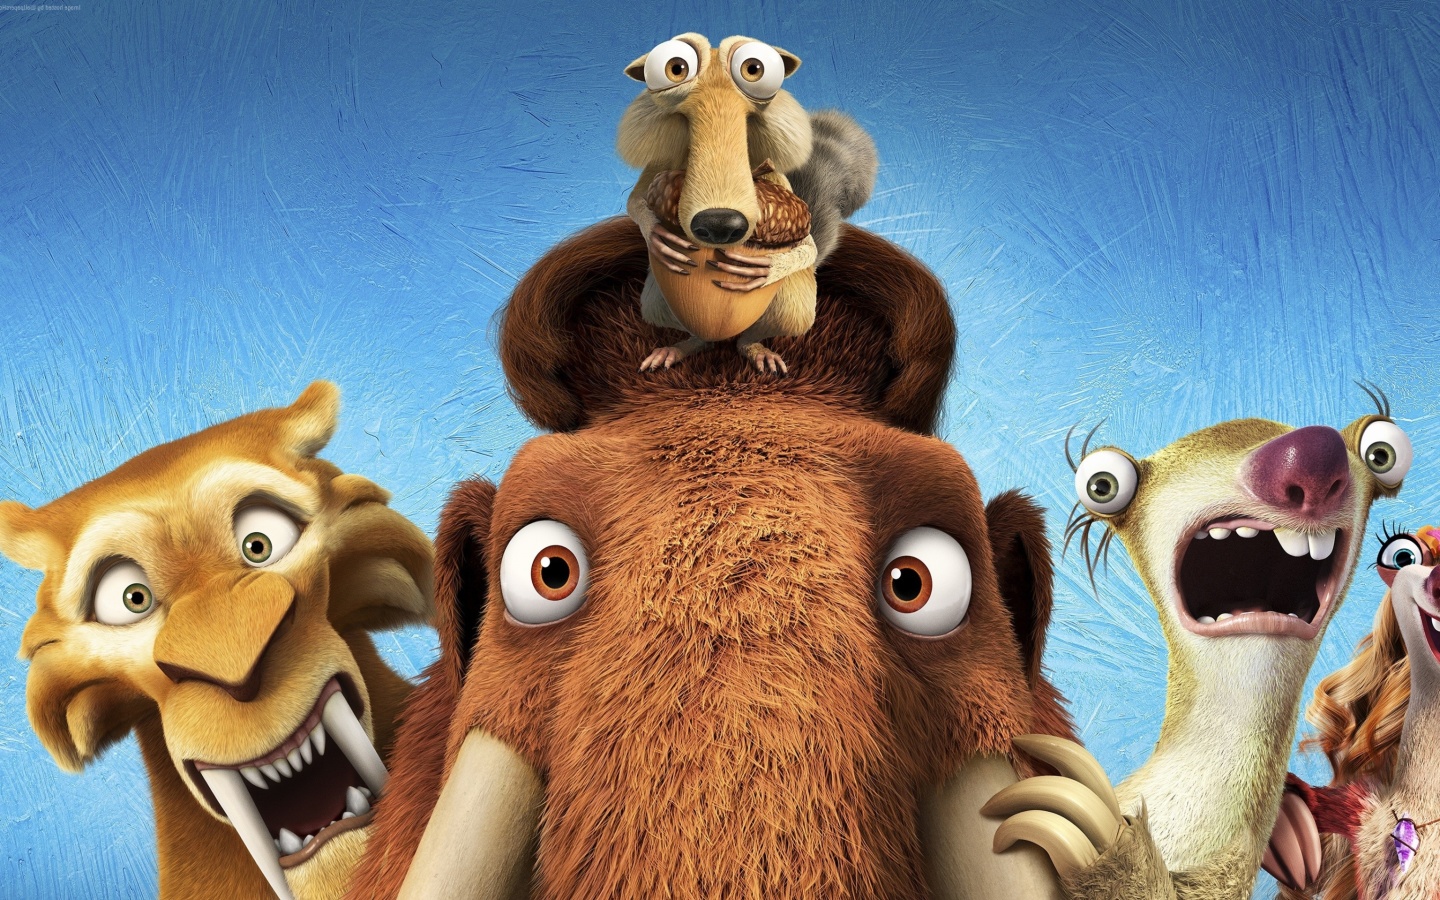 Das Ice Age 5 Collision Course with Diego, Manny, Scrat, Sid, Mammoths Wallpaper 1440x900